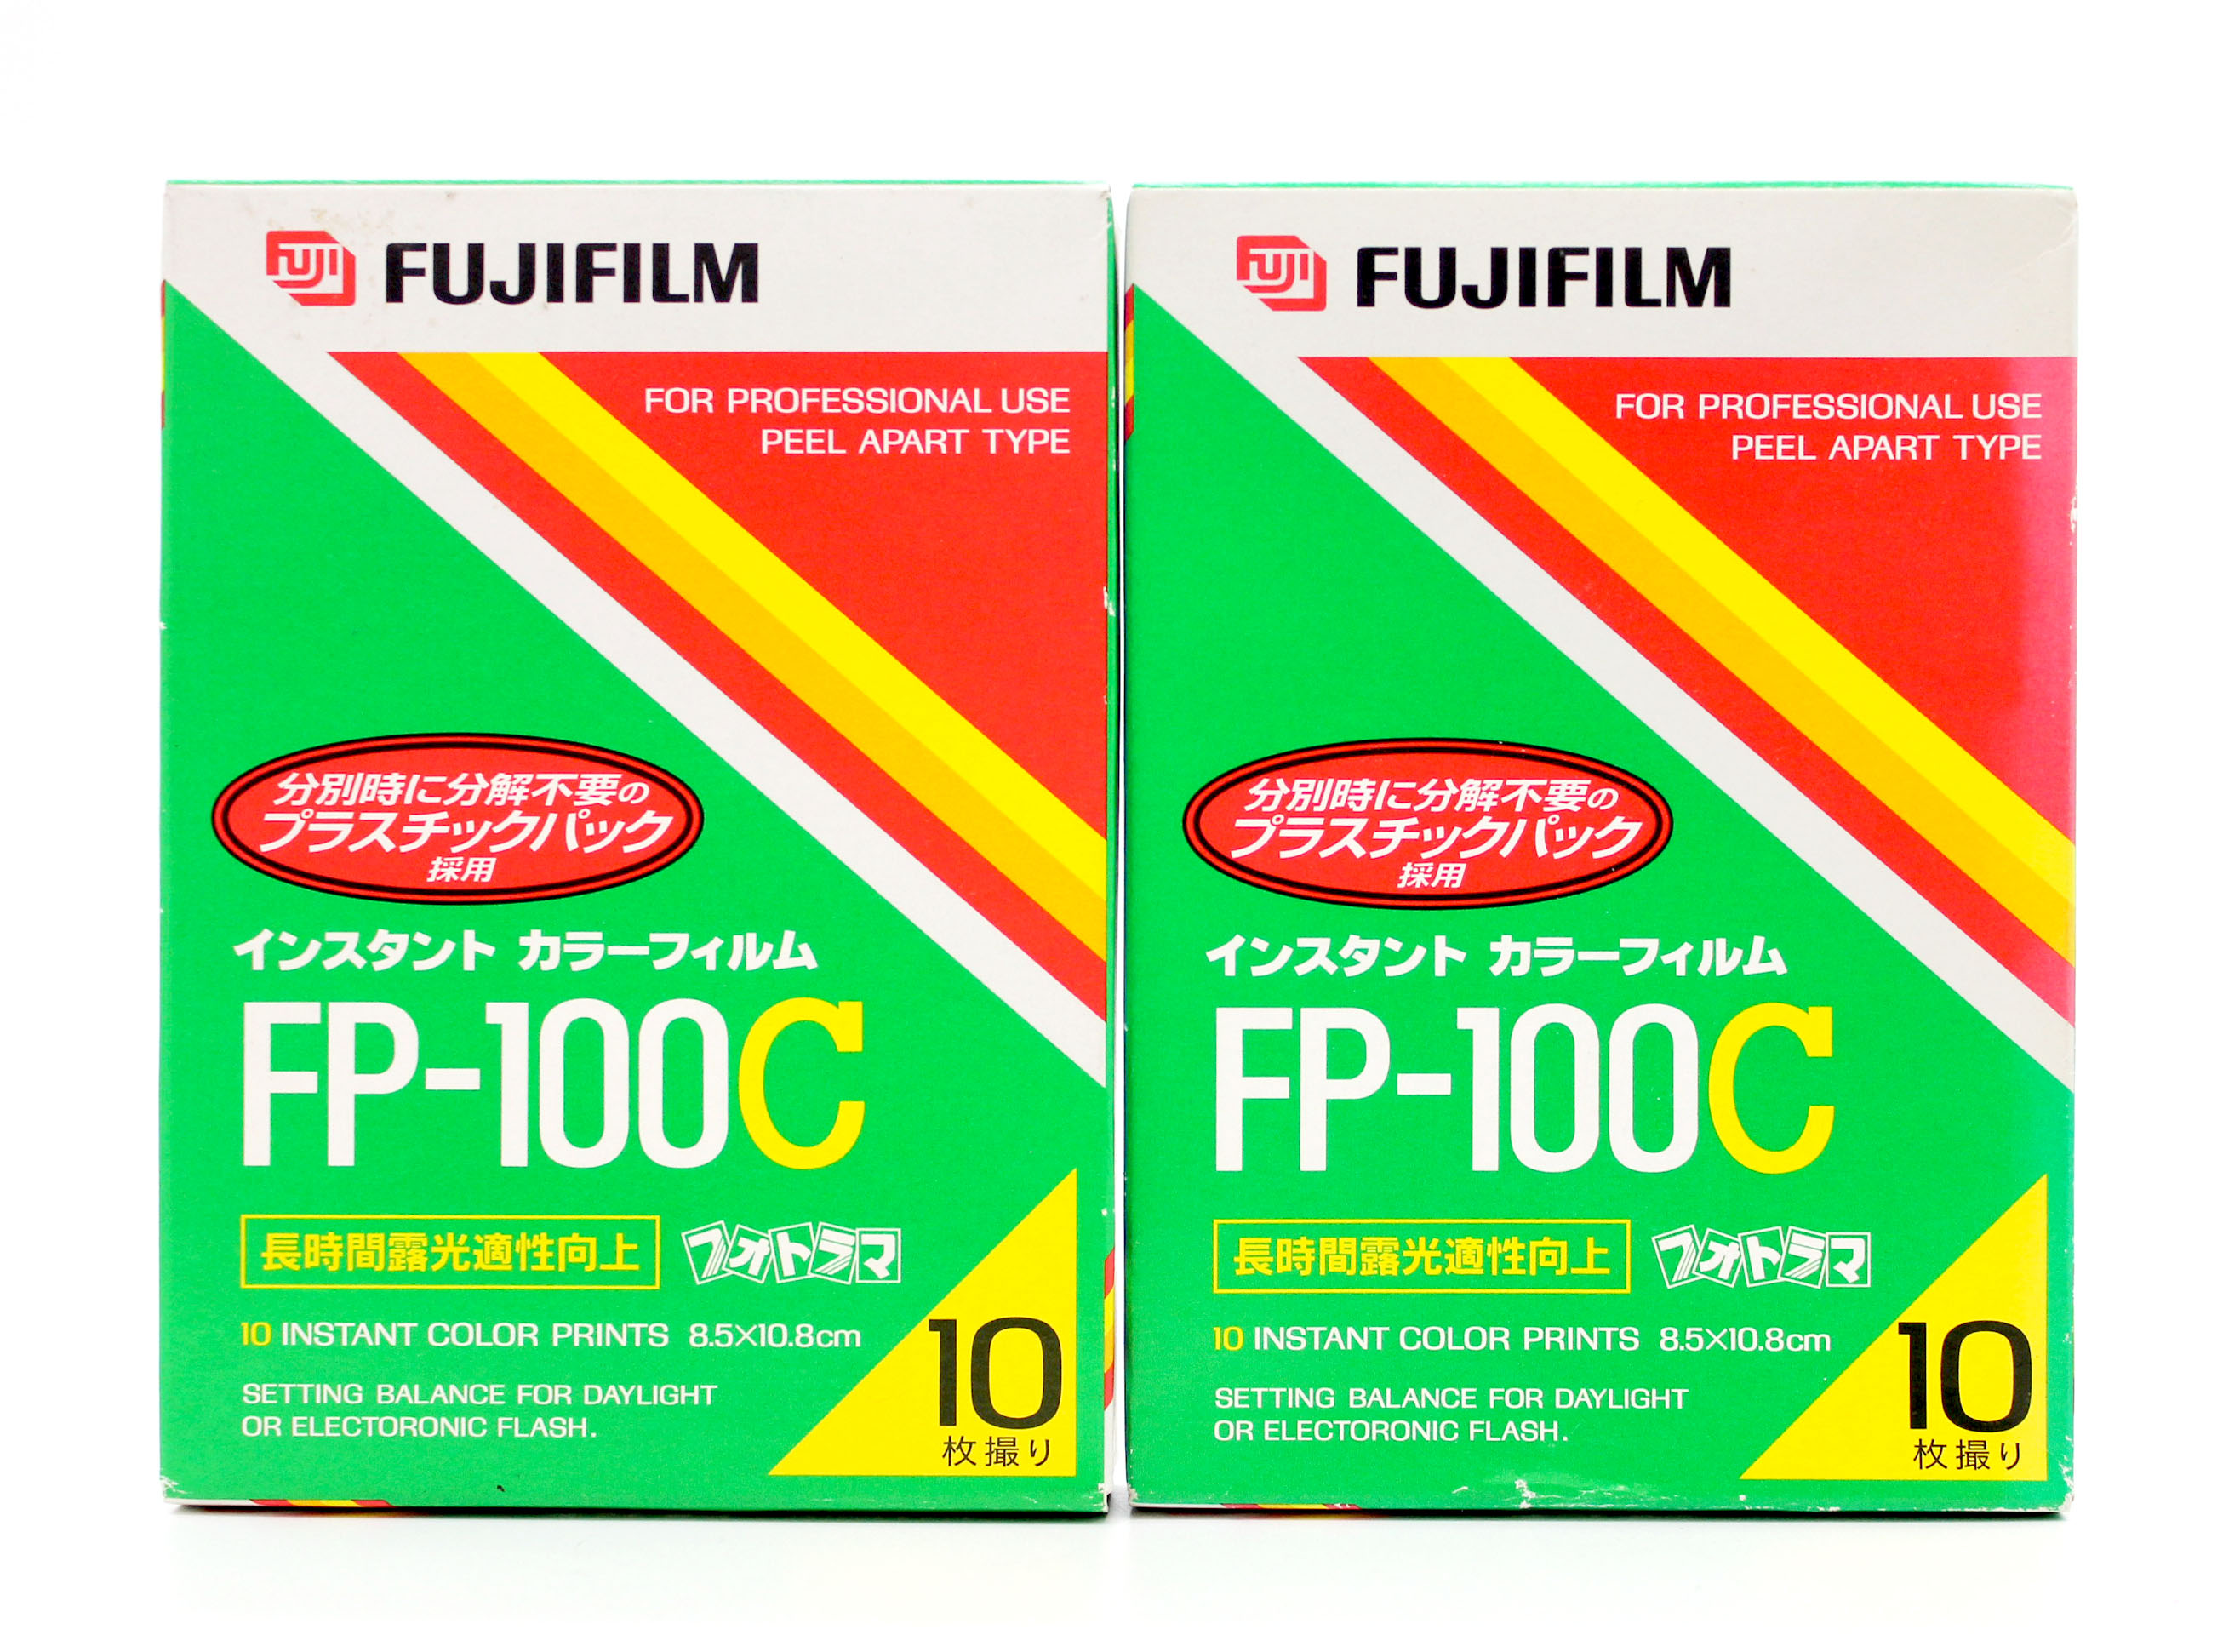  Fujifilm FP-100C Instant Color Film Set of 2 (Expired) from Japan Photo 1